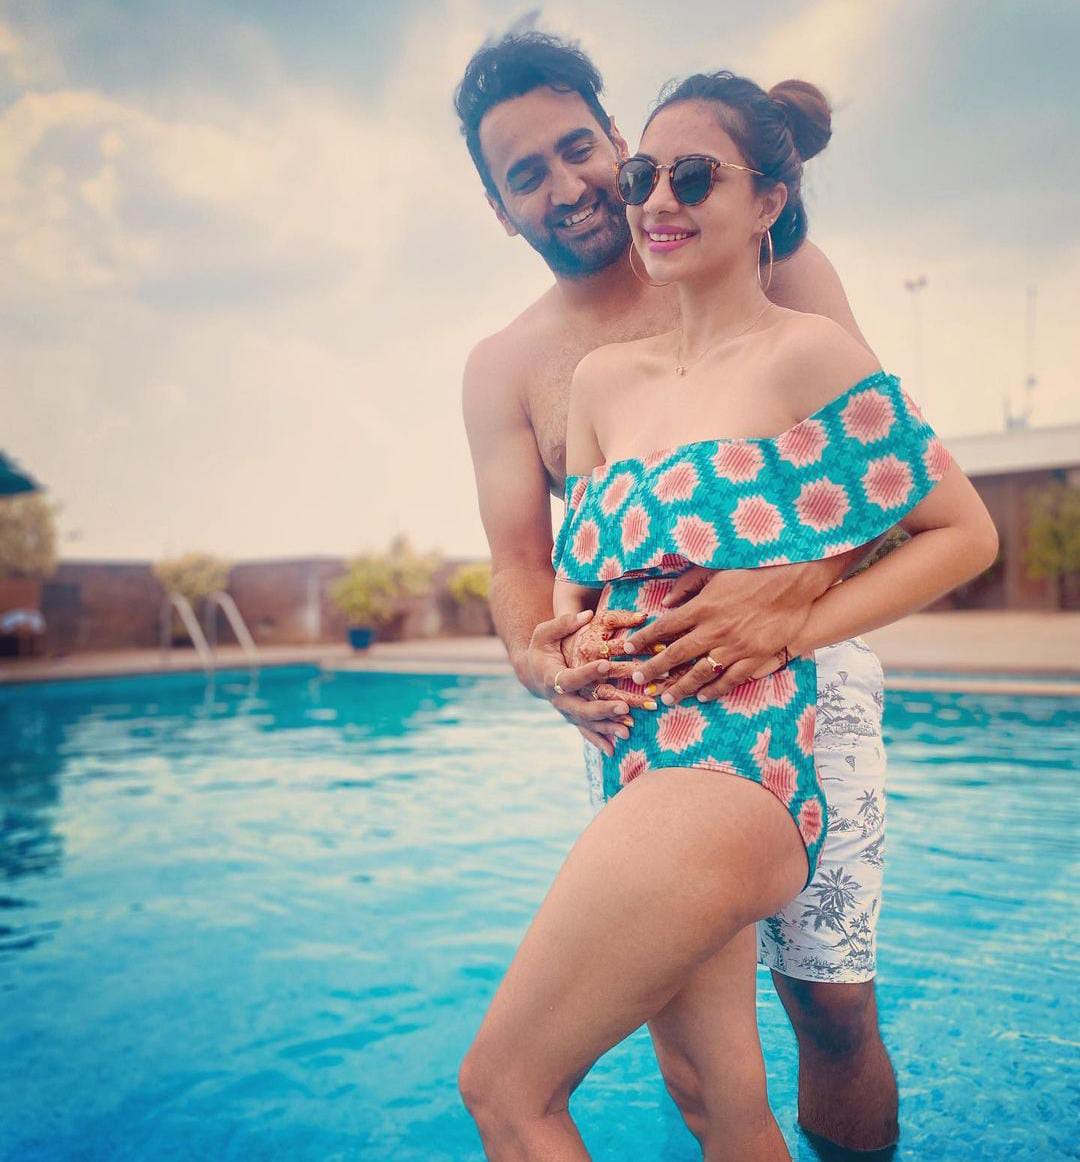 Pooja Banerjee expecting her first baby